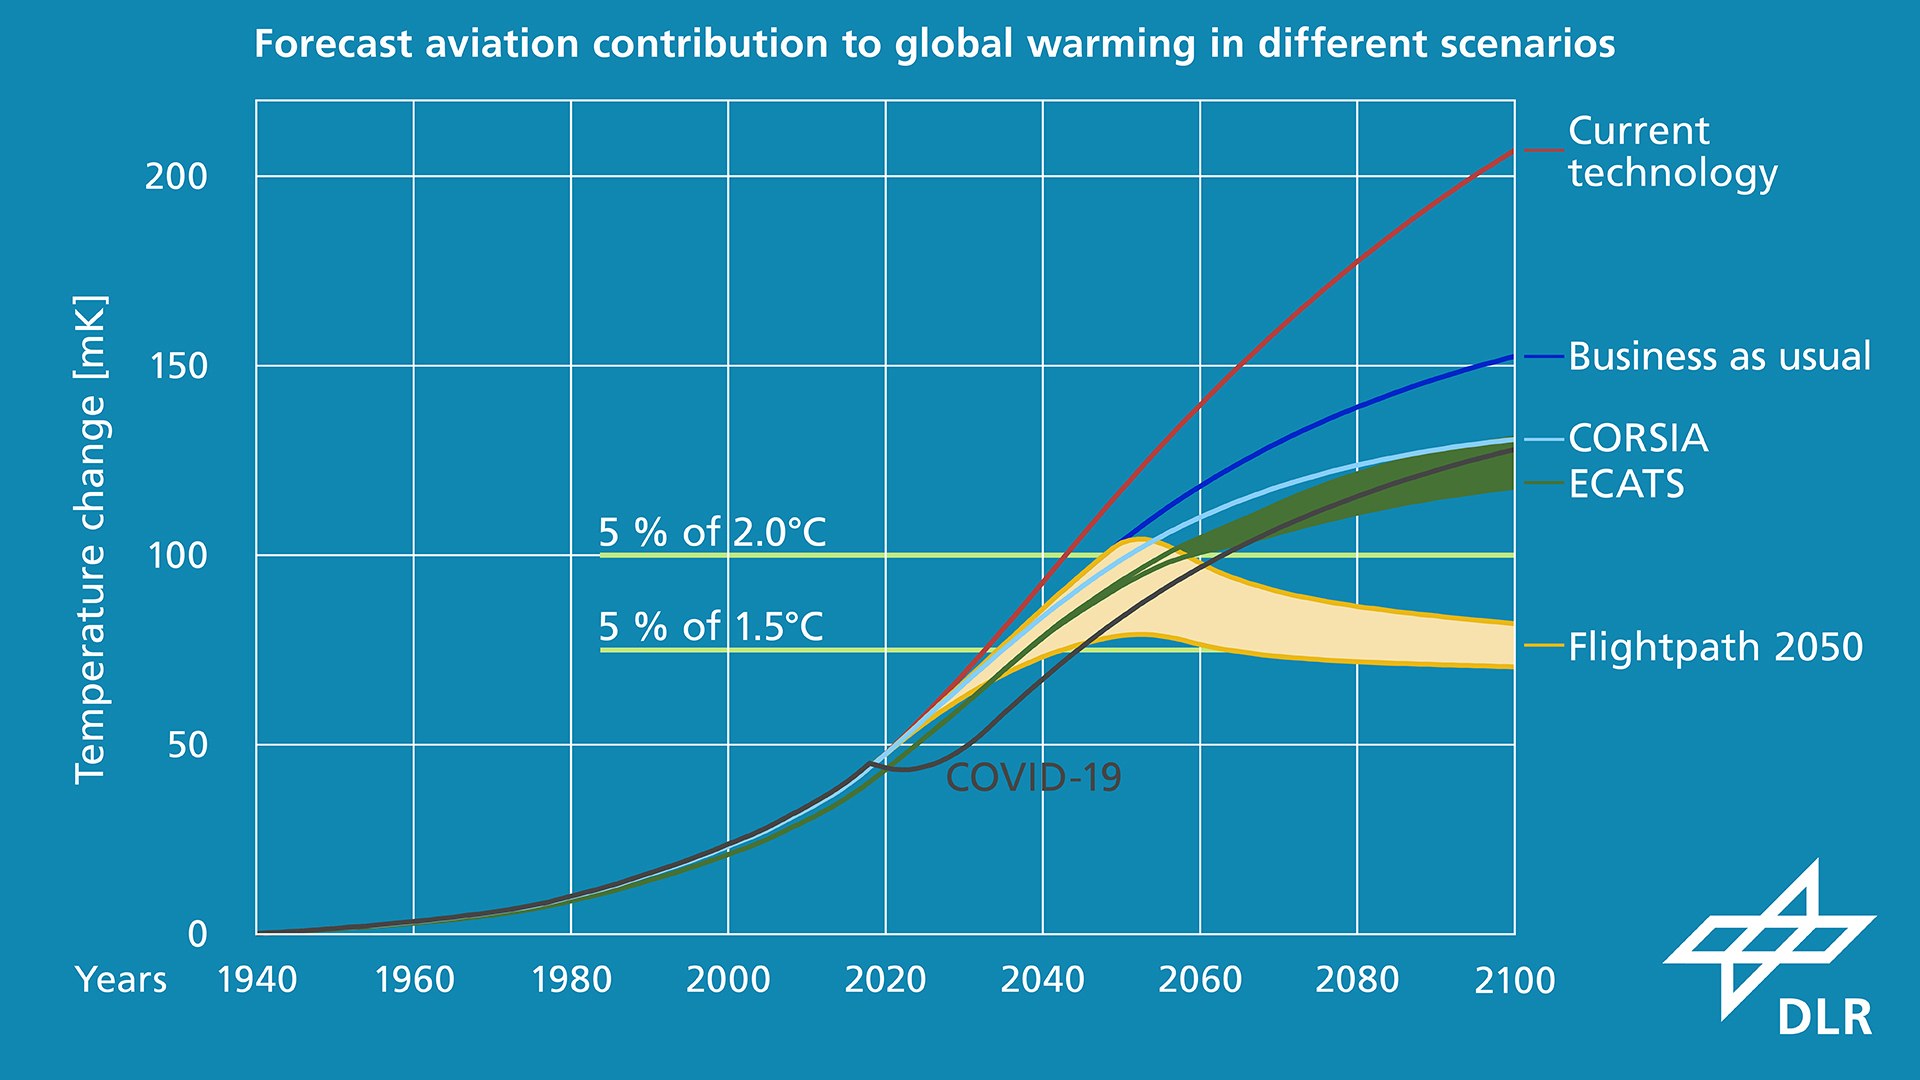 Predicting the impact of air transport on global warming in different scenarios